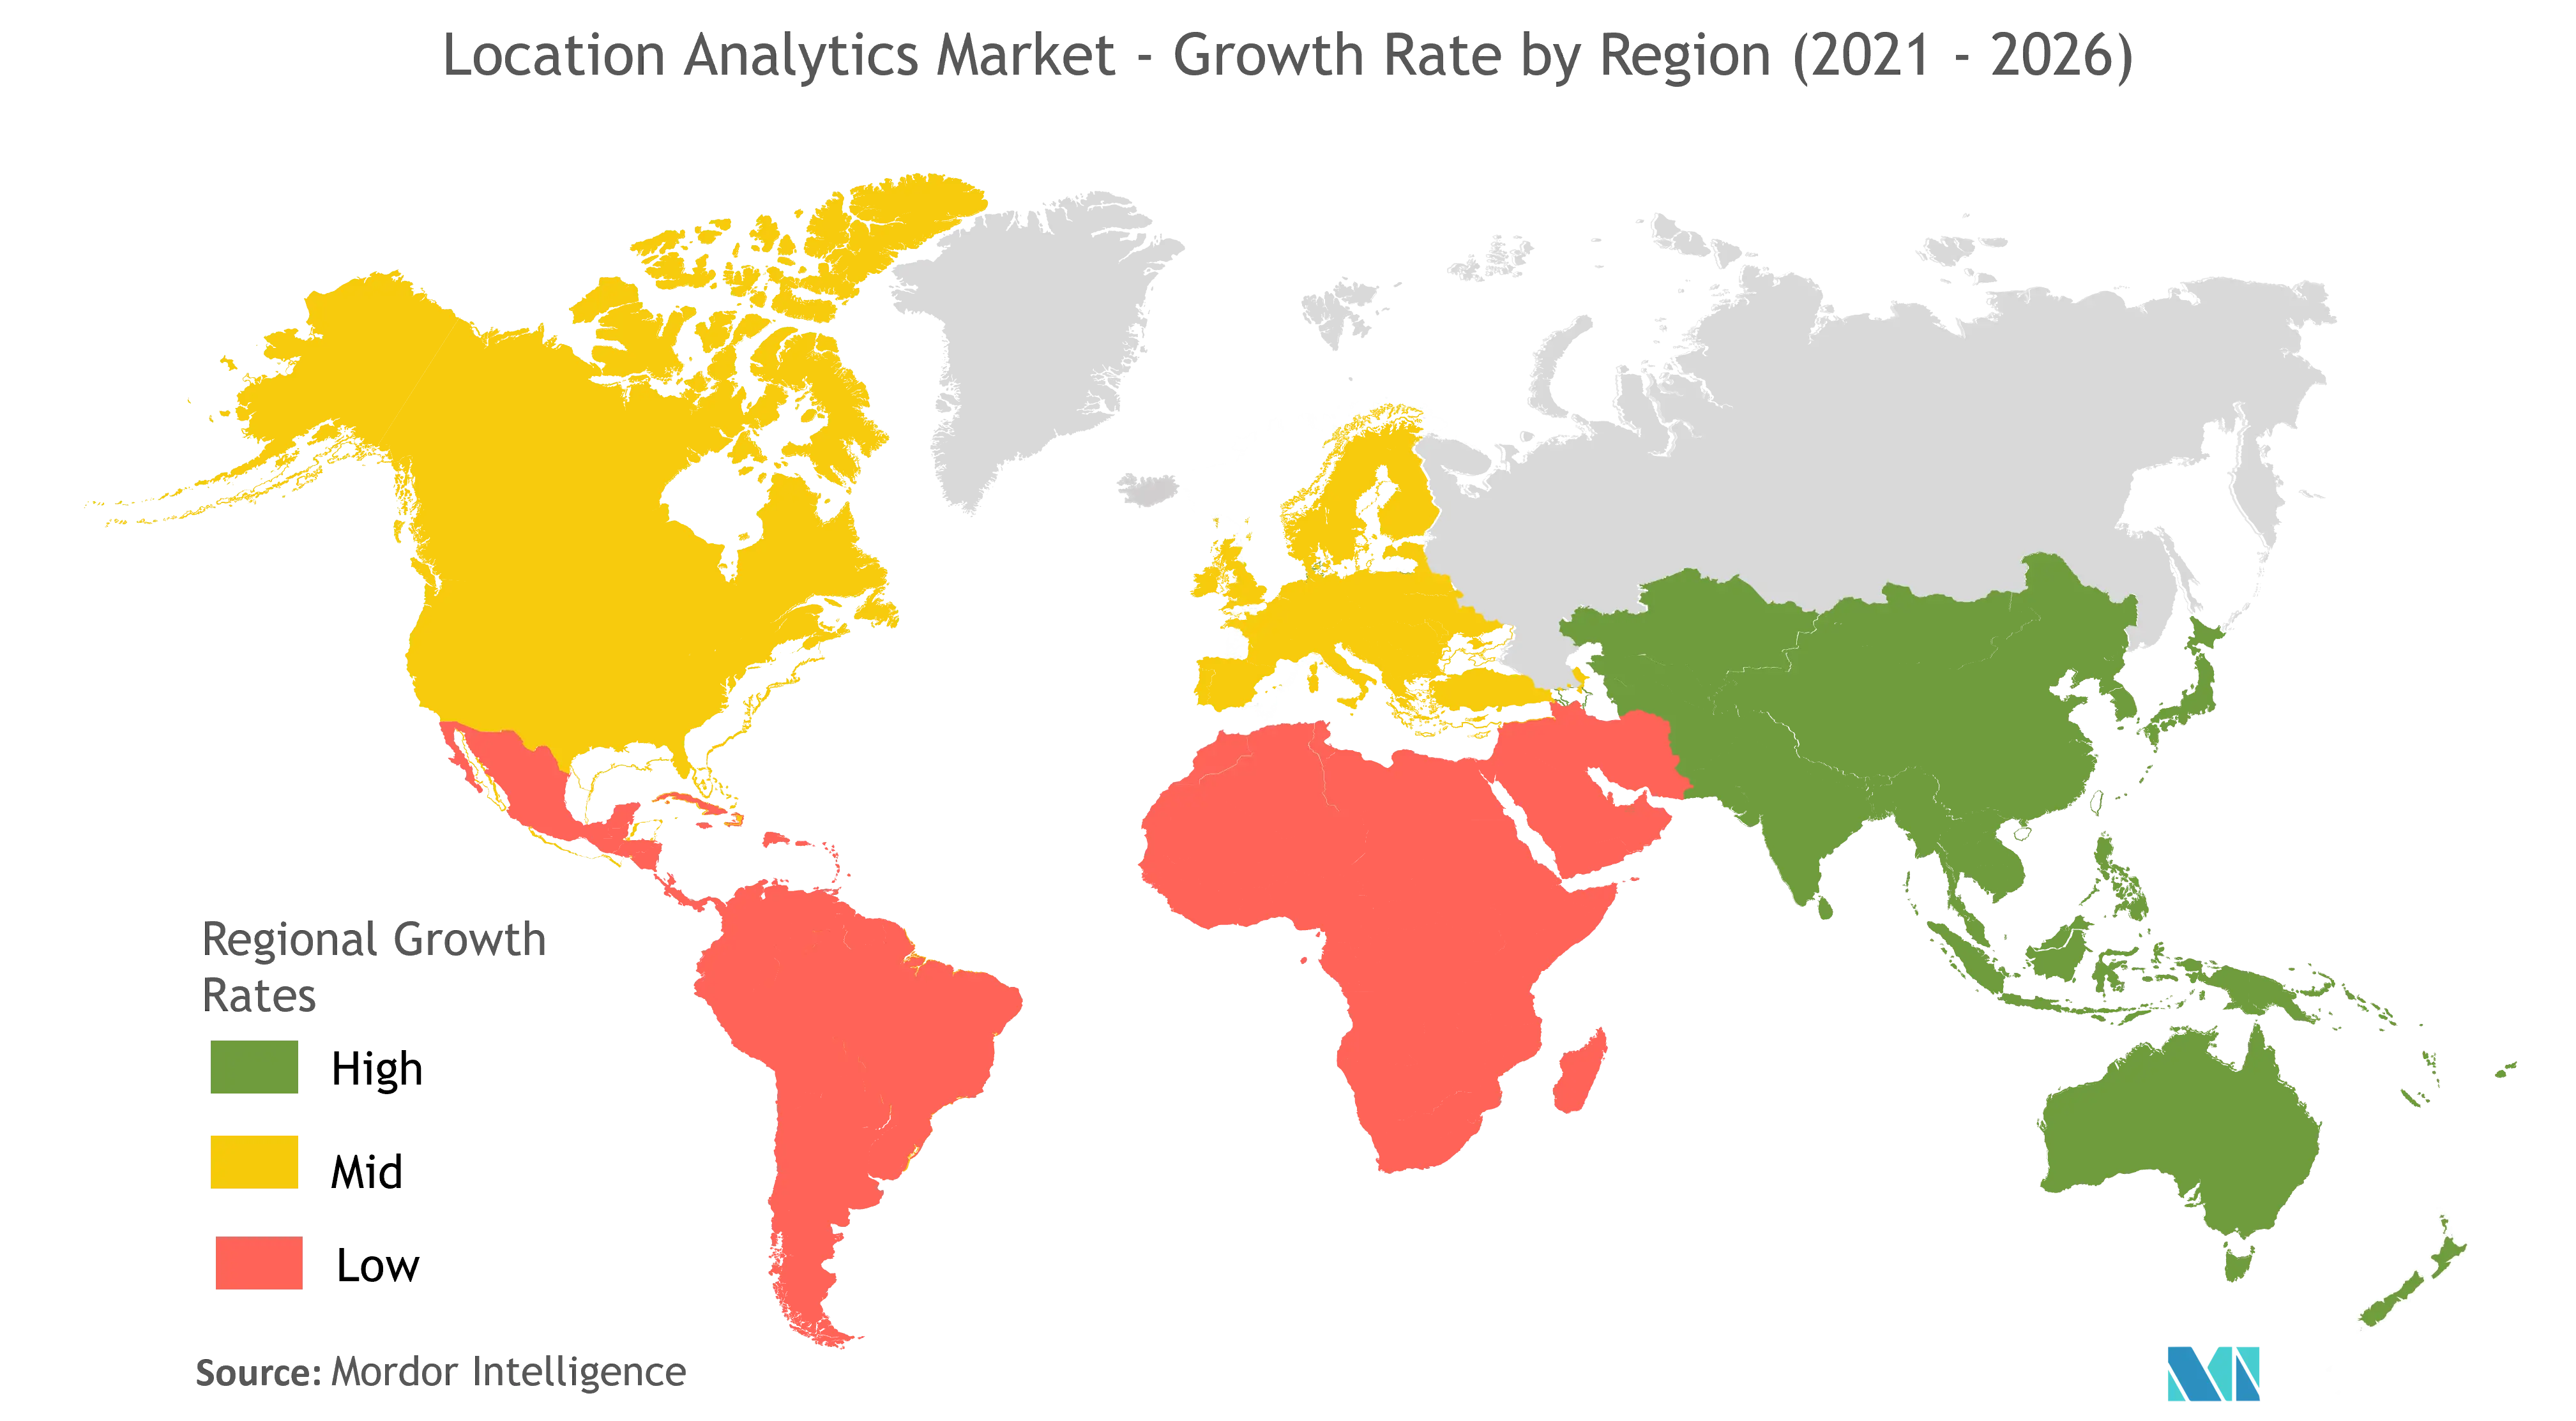 Location Analytics Market - Growth Rate by Region (2021 - 2026)